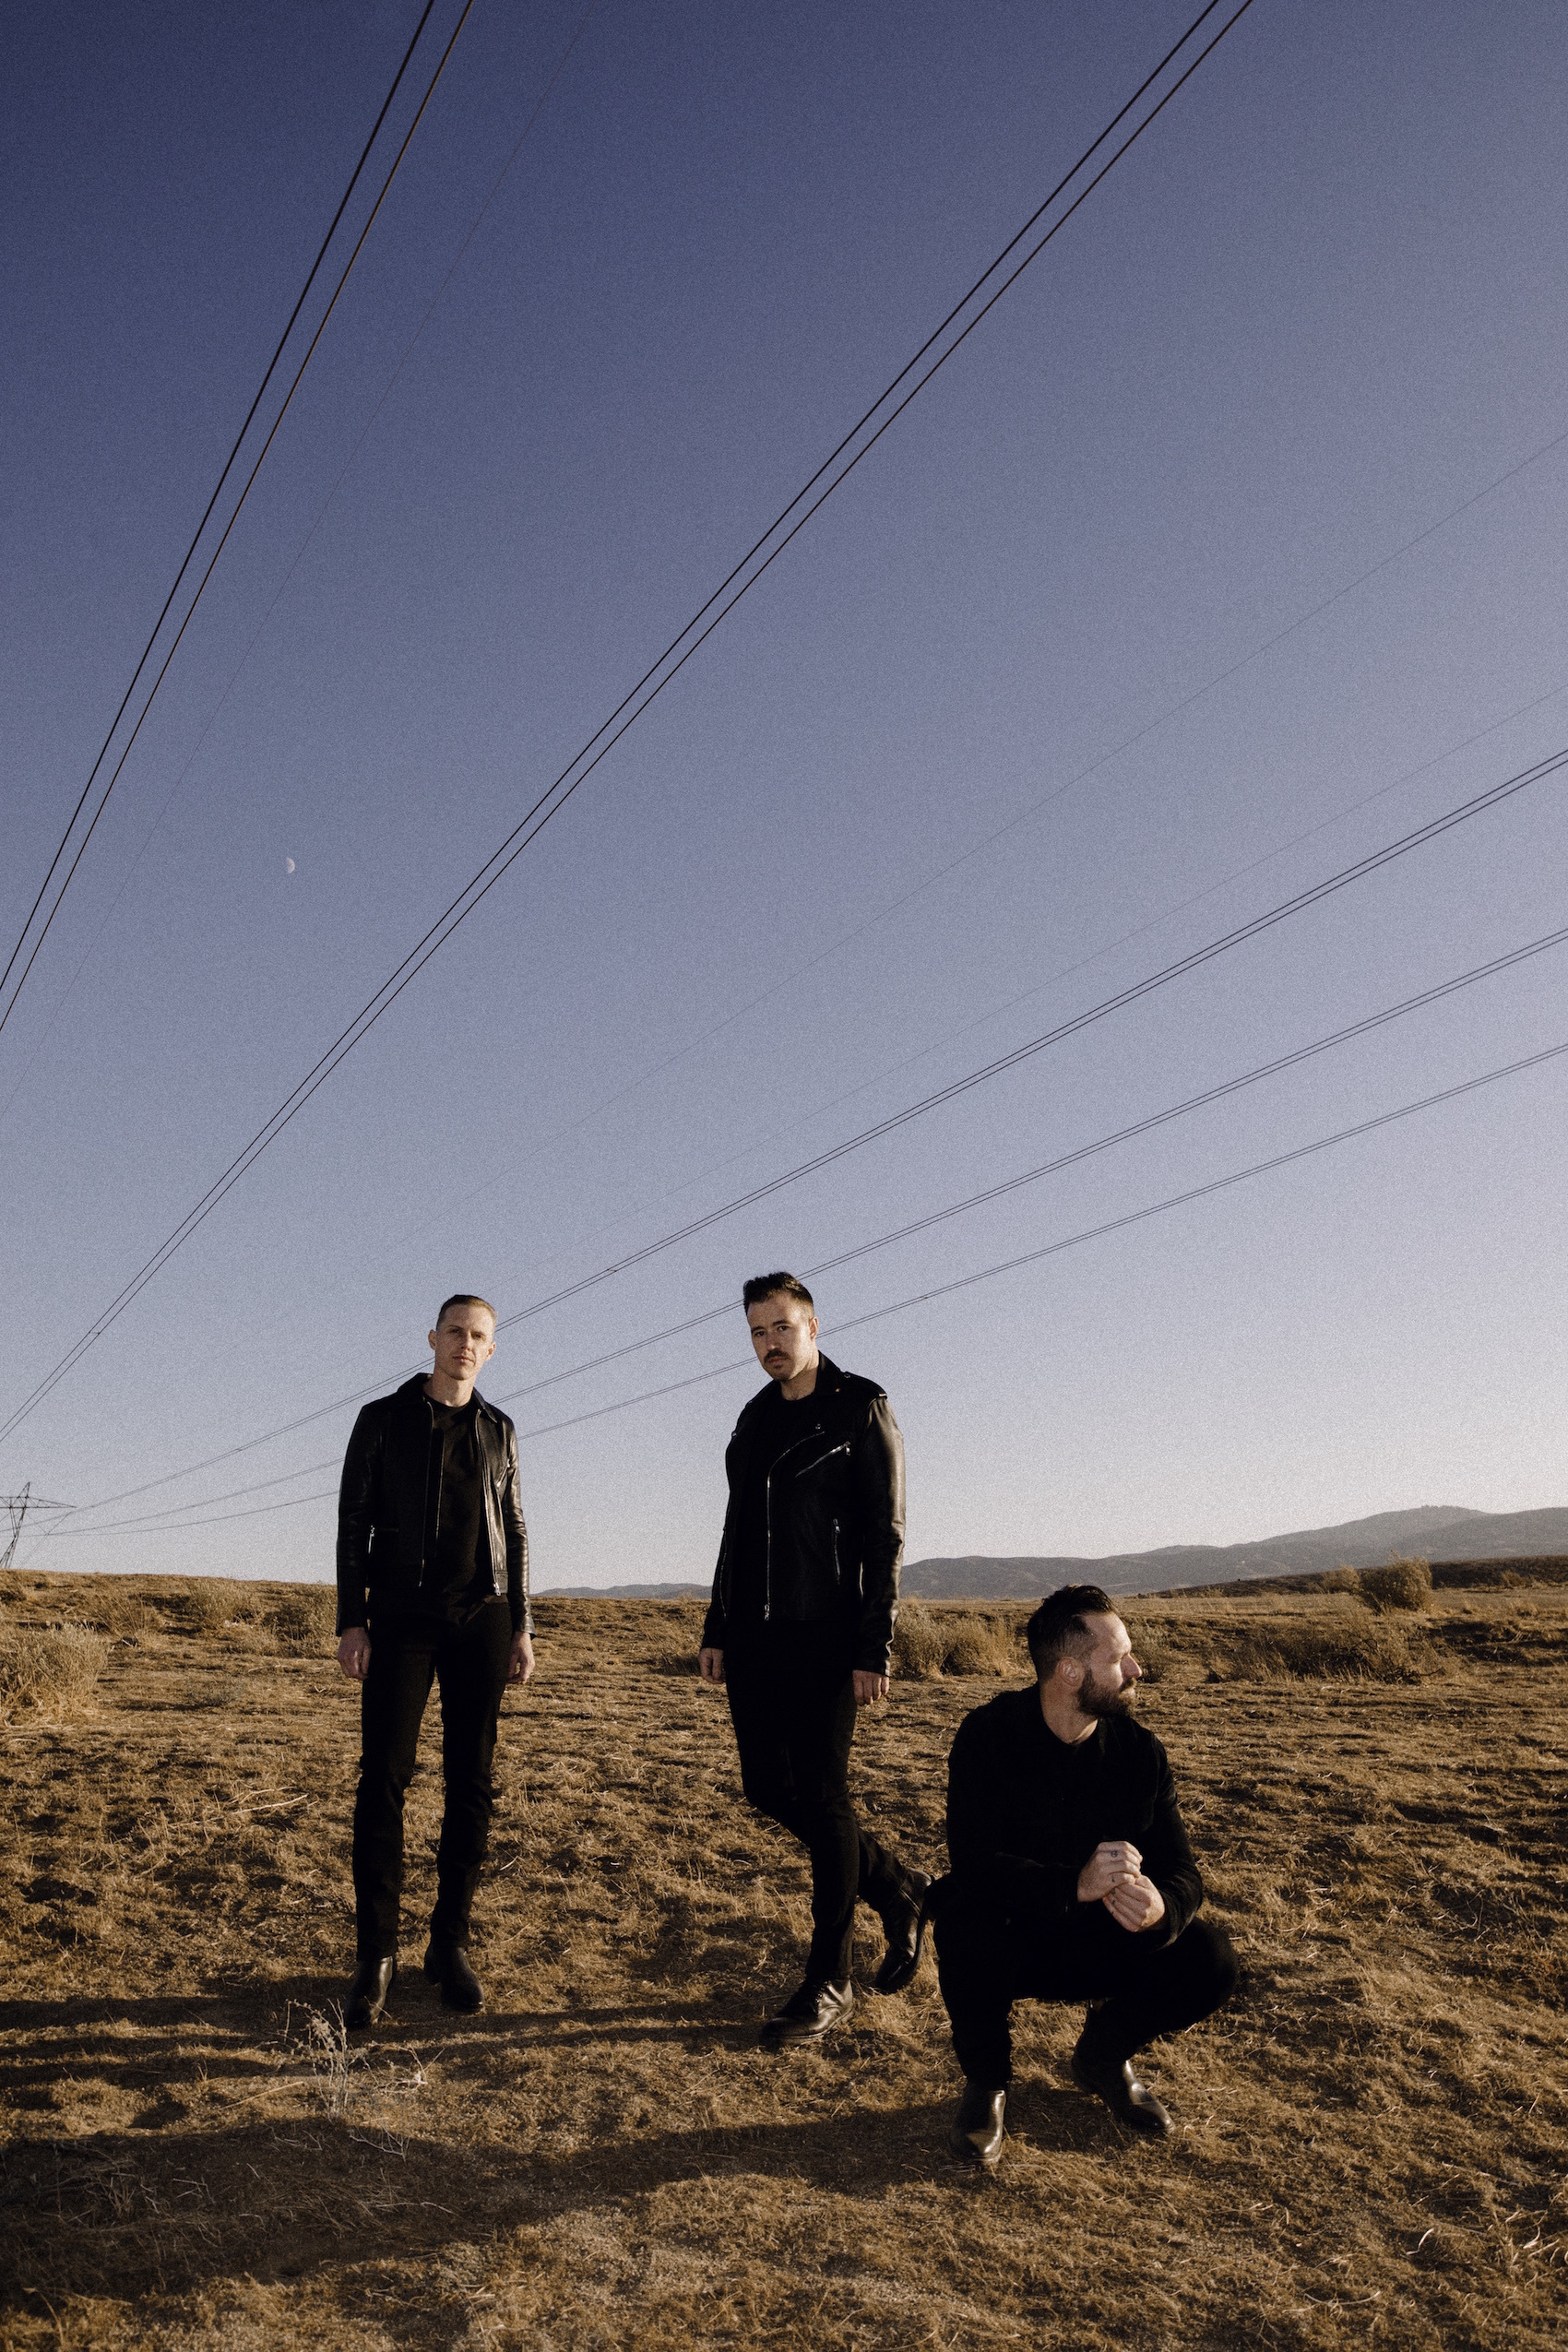 RÜFÜS DU SOL COLLECT ARIA AWARDS FOR ‘BEST GROUP’ AND ‘BEST DANCE RELEASE’